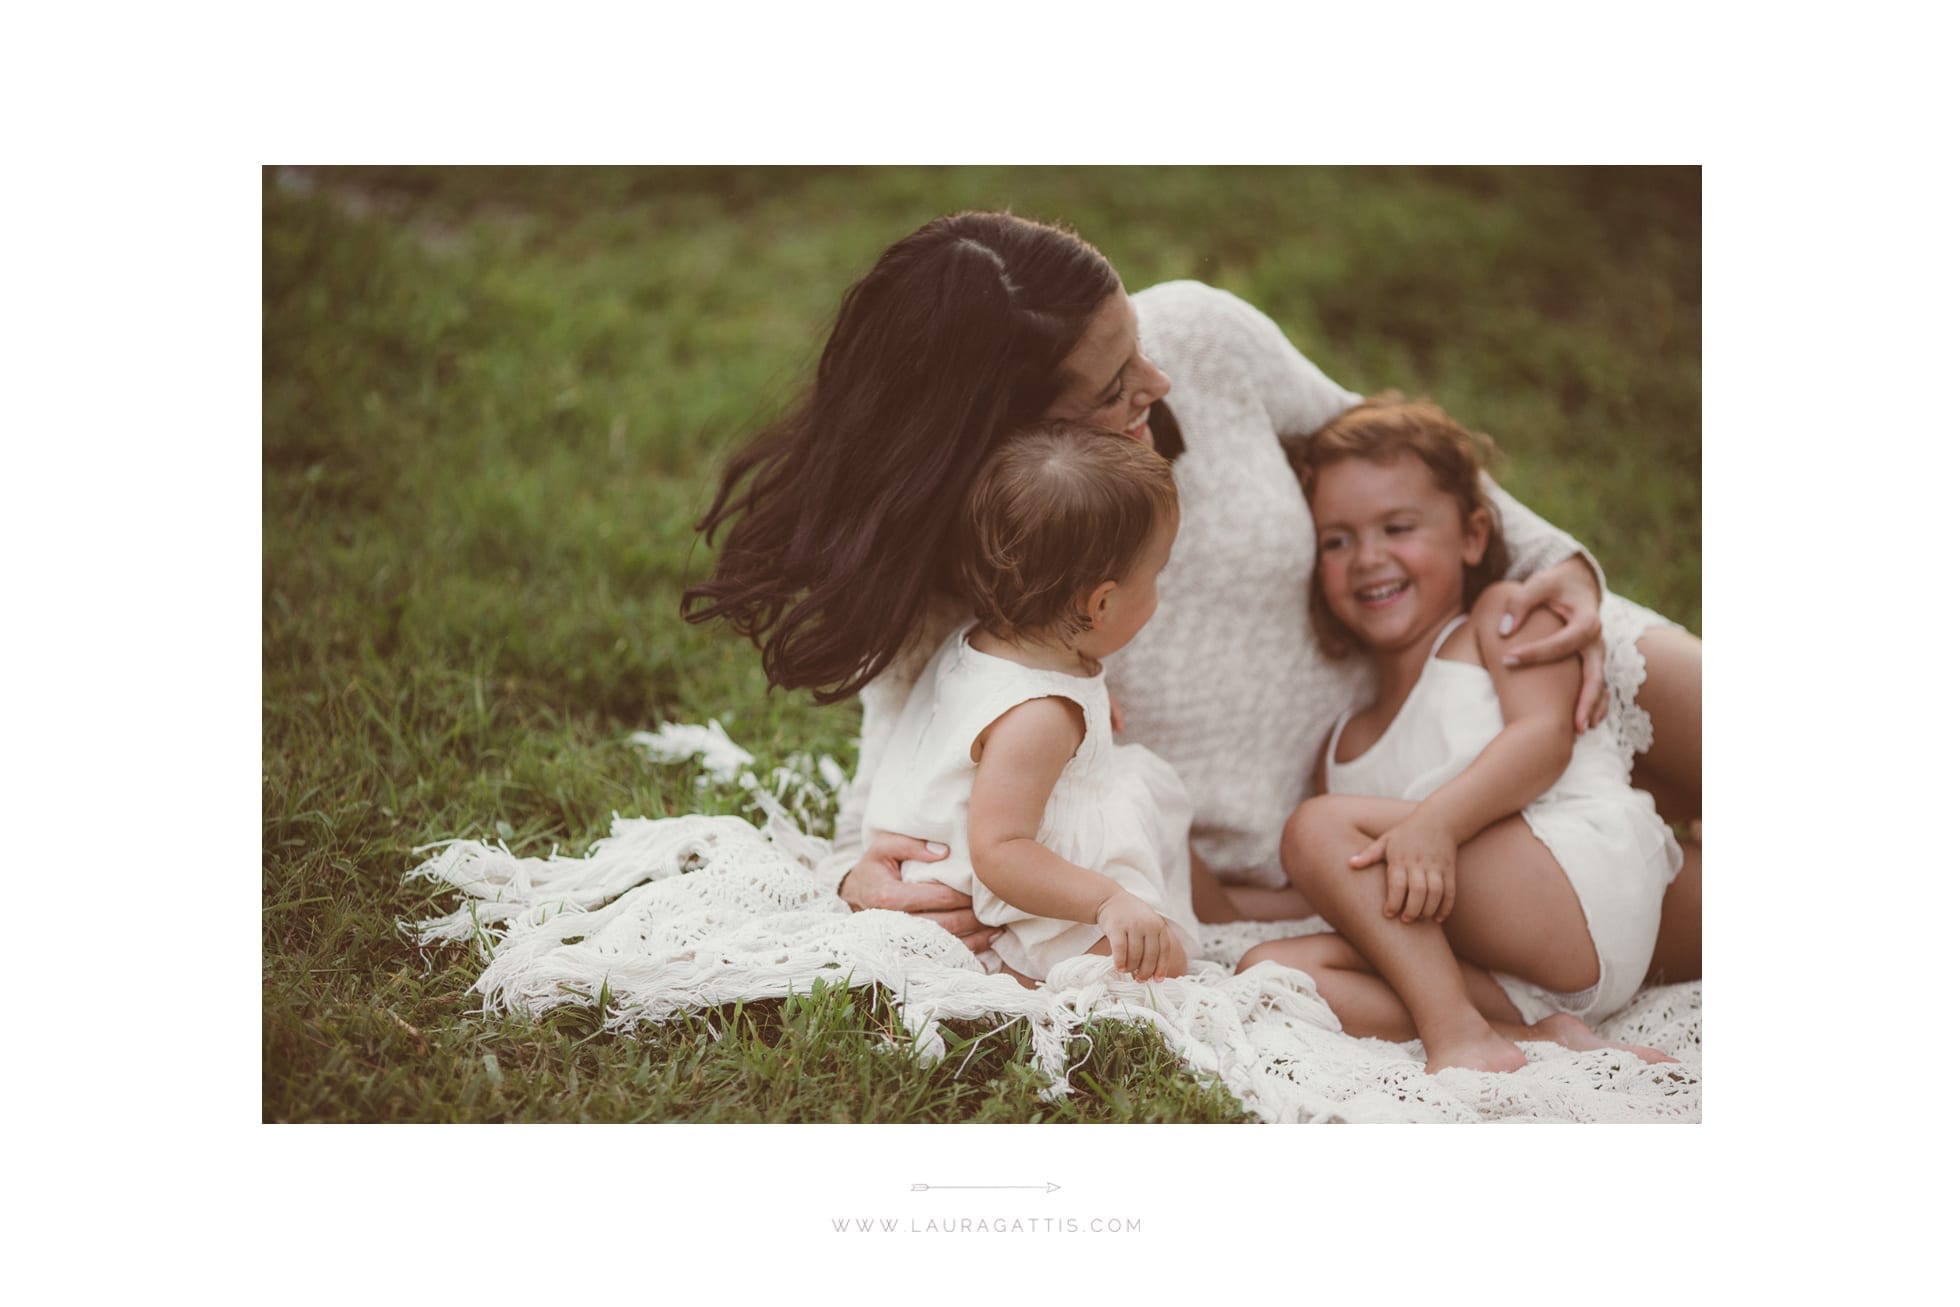 film style family photography | laura gattis photography